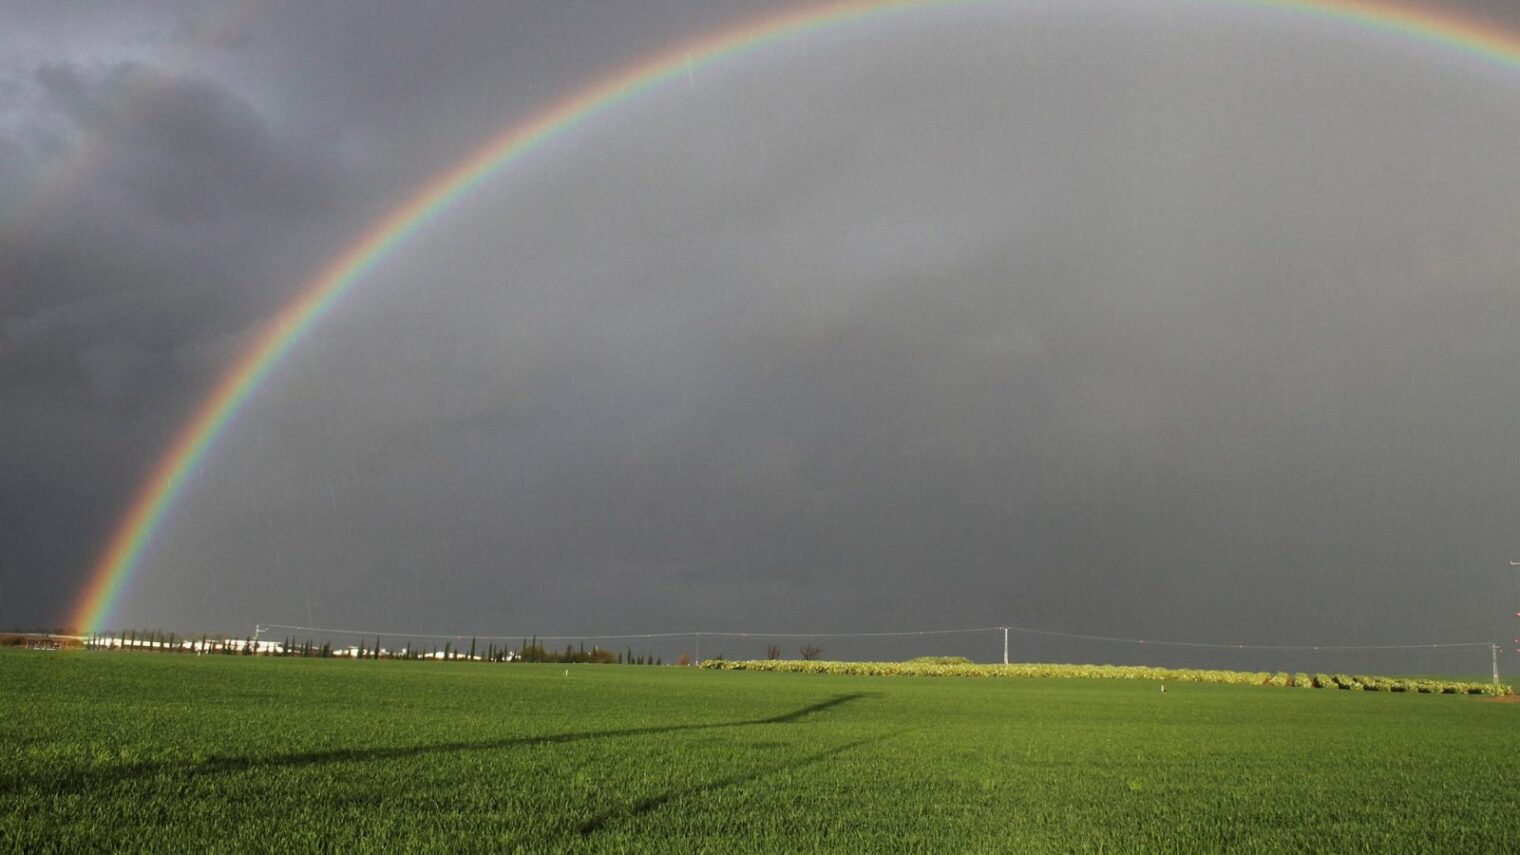 Because Israel has more rainbows than many other countries. A rainbow over a wheat field near Kfar Harif, in southern Israel. Photo by Gershon Elinson/FLASH90